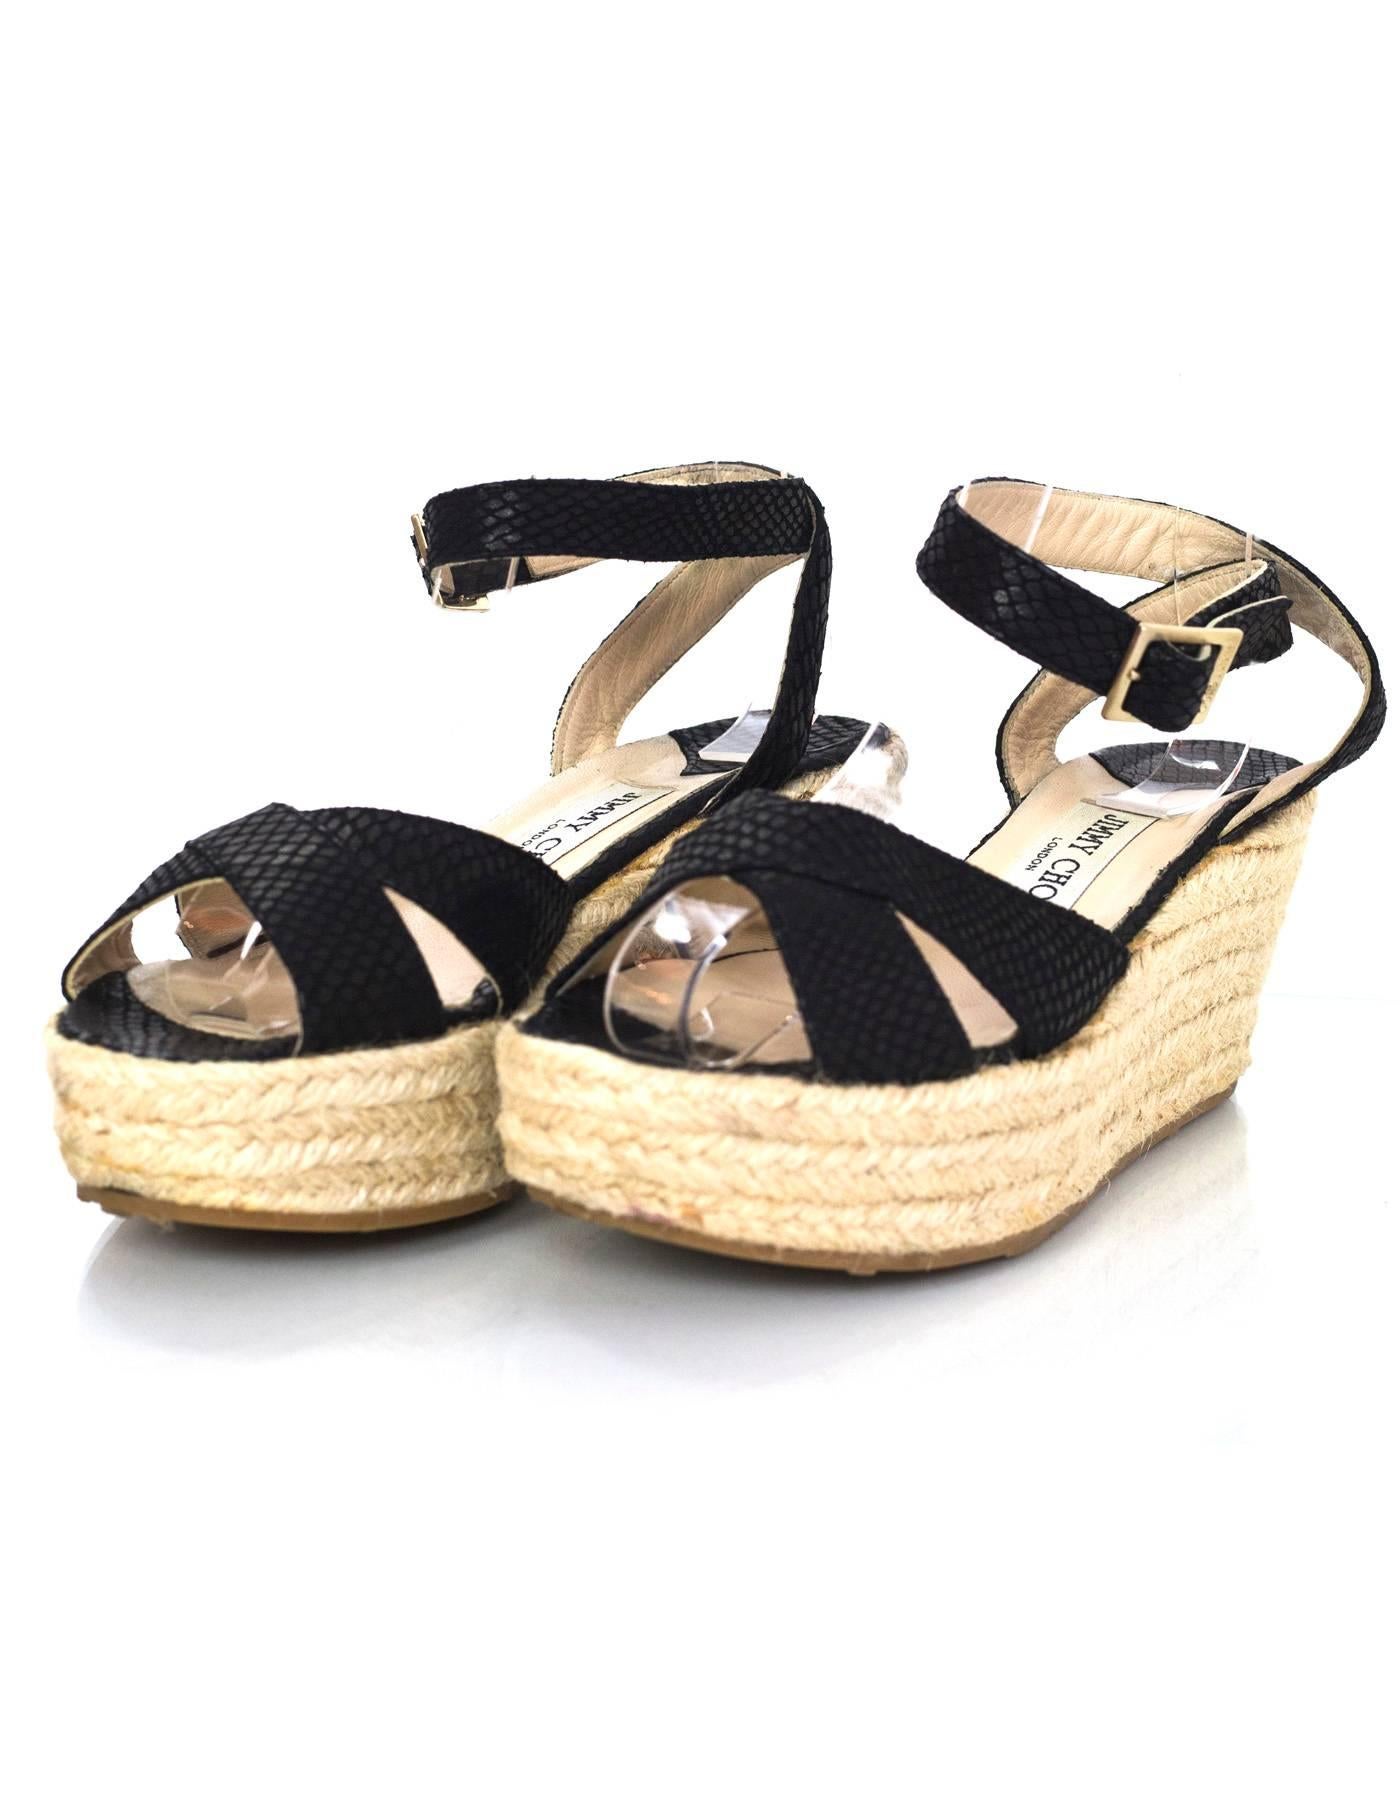 Jimmy Choo Black Embossed Snakeskin Platform Sandals Sz 36

Made In: Italy
Color: Black, tan
Materials: Embossed leather, jute rope
Closure/Opening: Buckle closure at ankle
Sole Stamp: Jimmy Choo London Made in Italy 36
Overall Condition: Very good